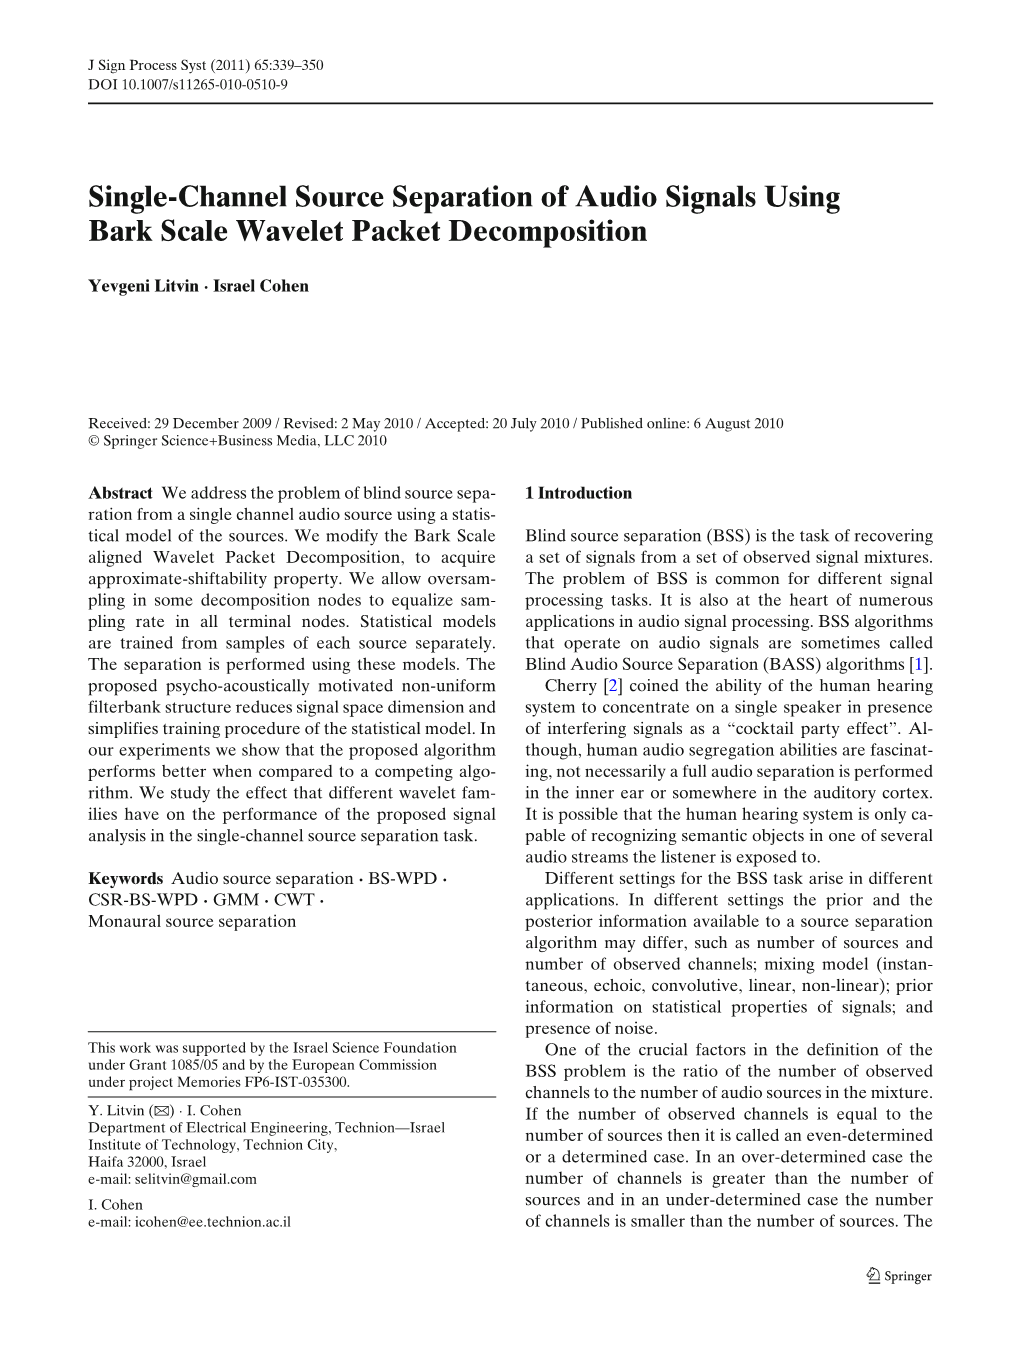 Single-Channel Source Separation of Audio Signals Using Bark Scale Wavelet Packet Decomposition